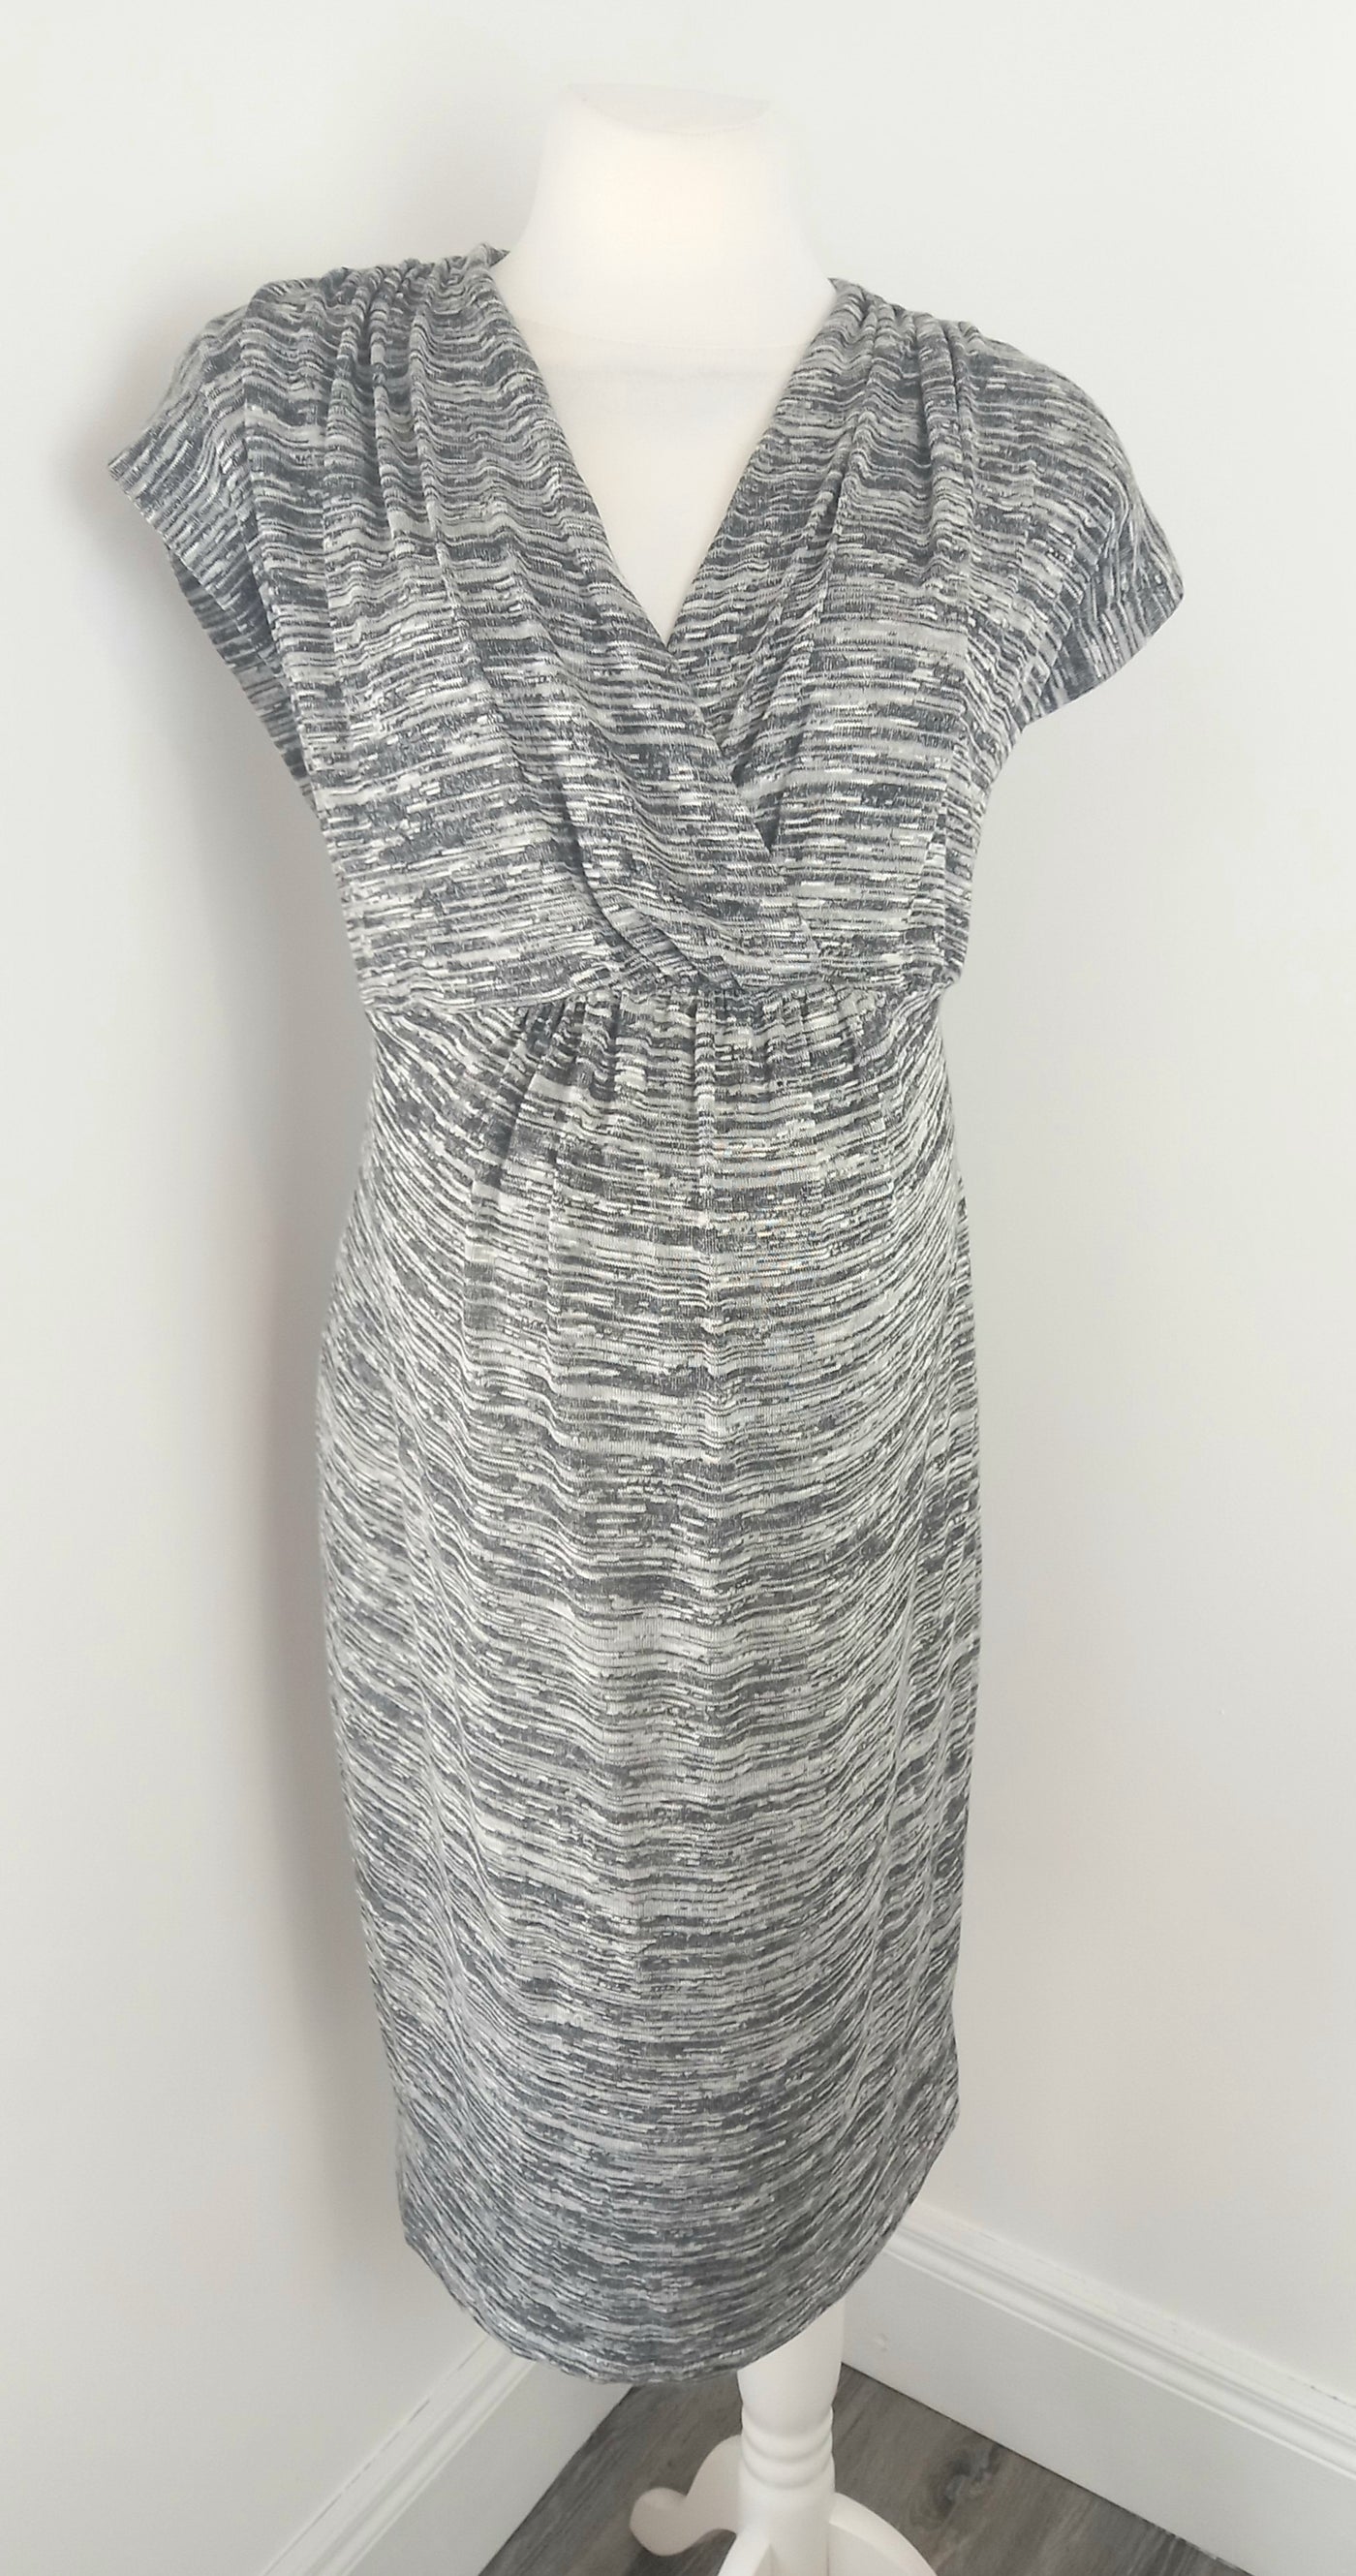 New Look Maternity grey & white marl cap sleeve crossover front dress (BNWT) - Size 18